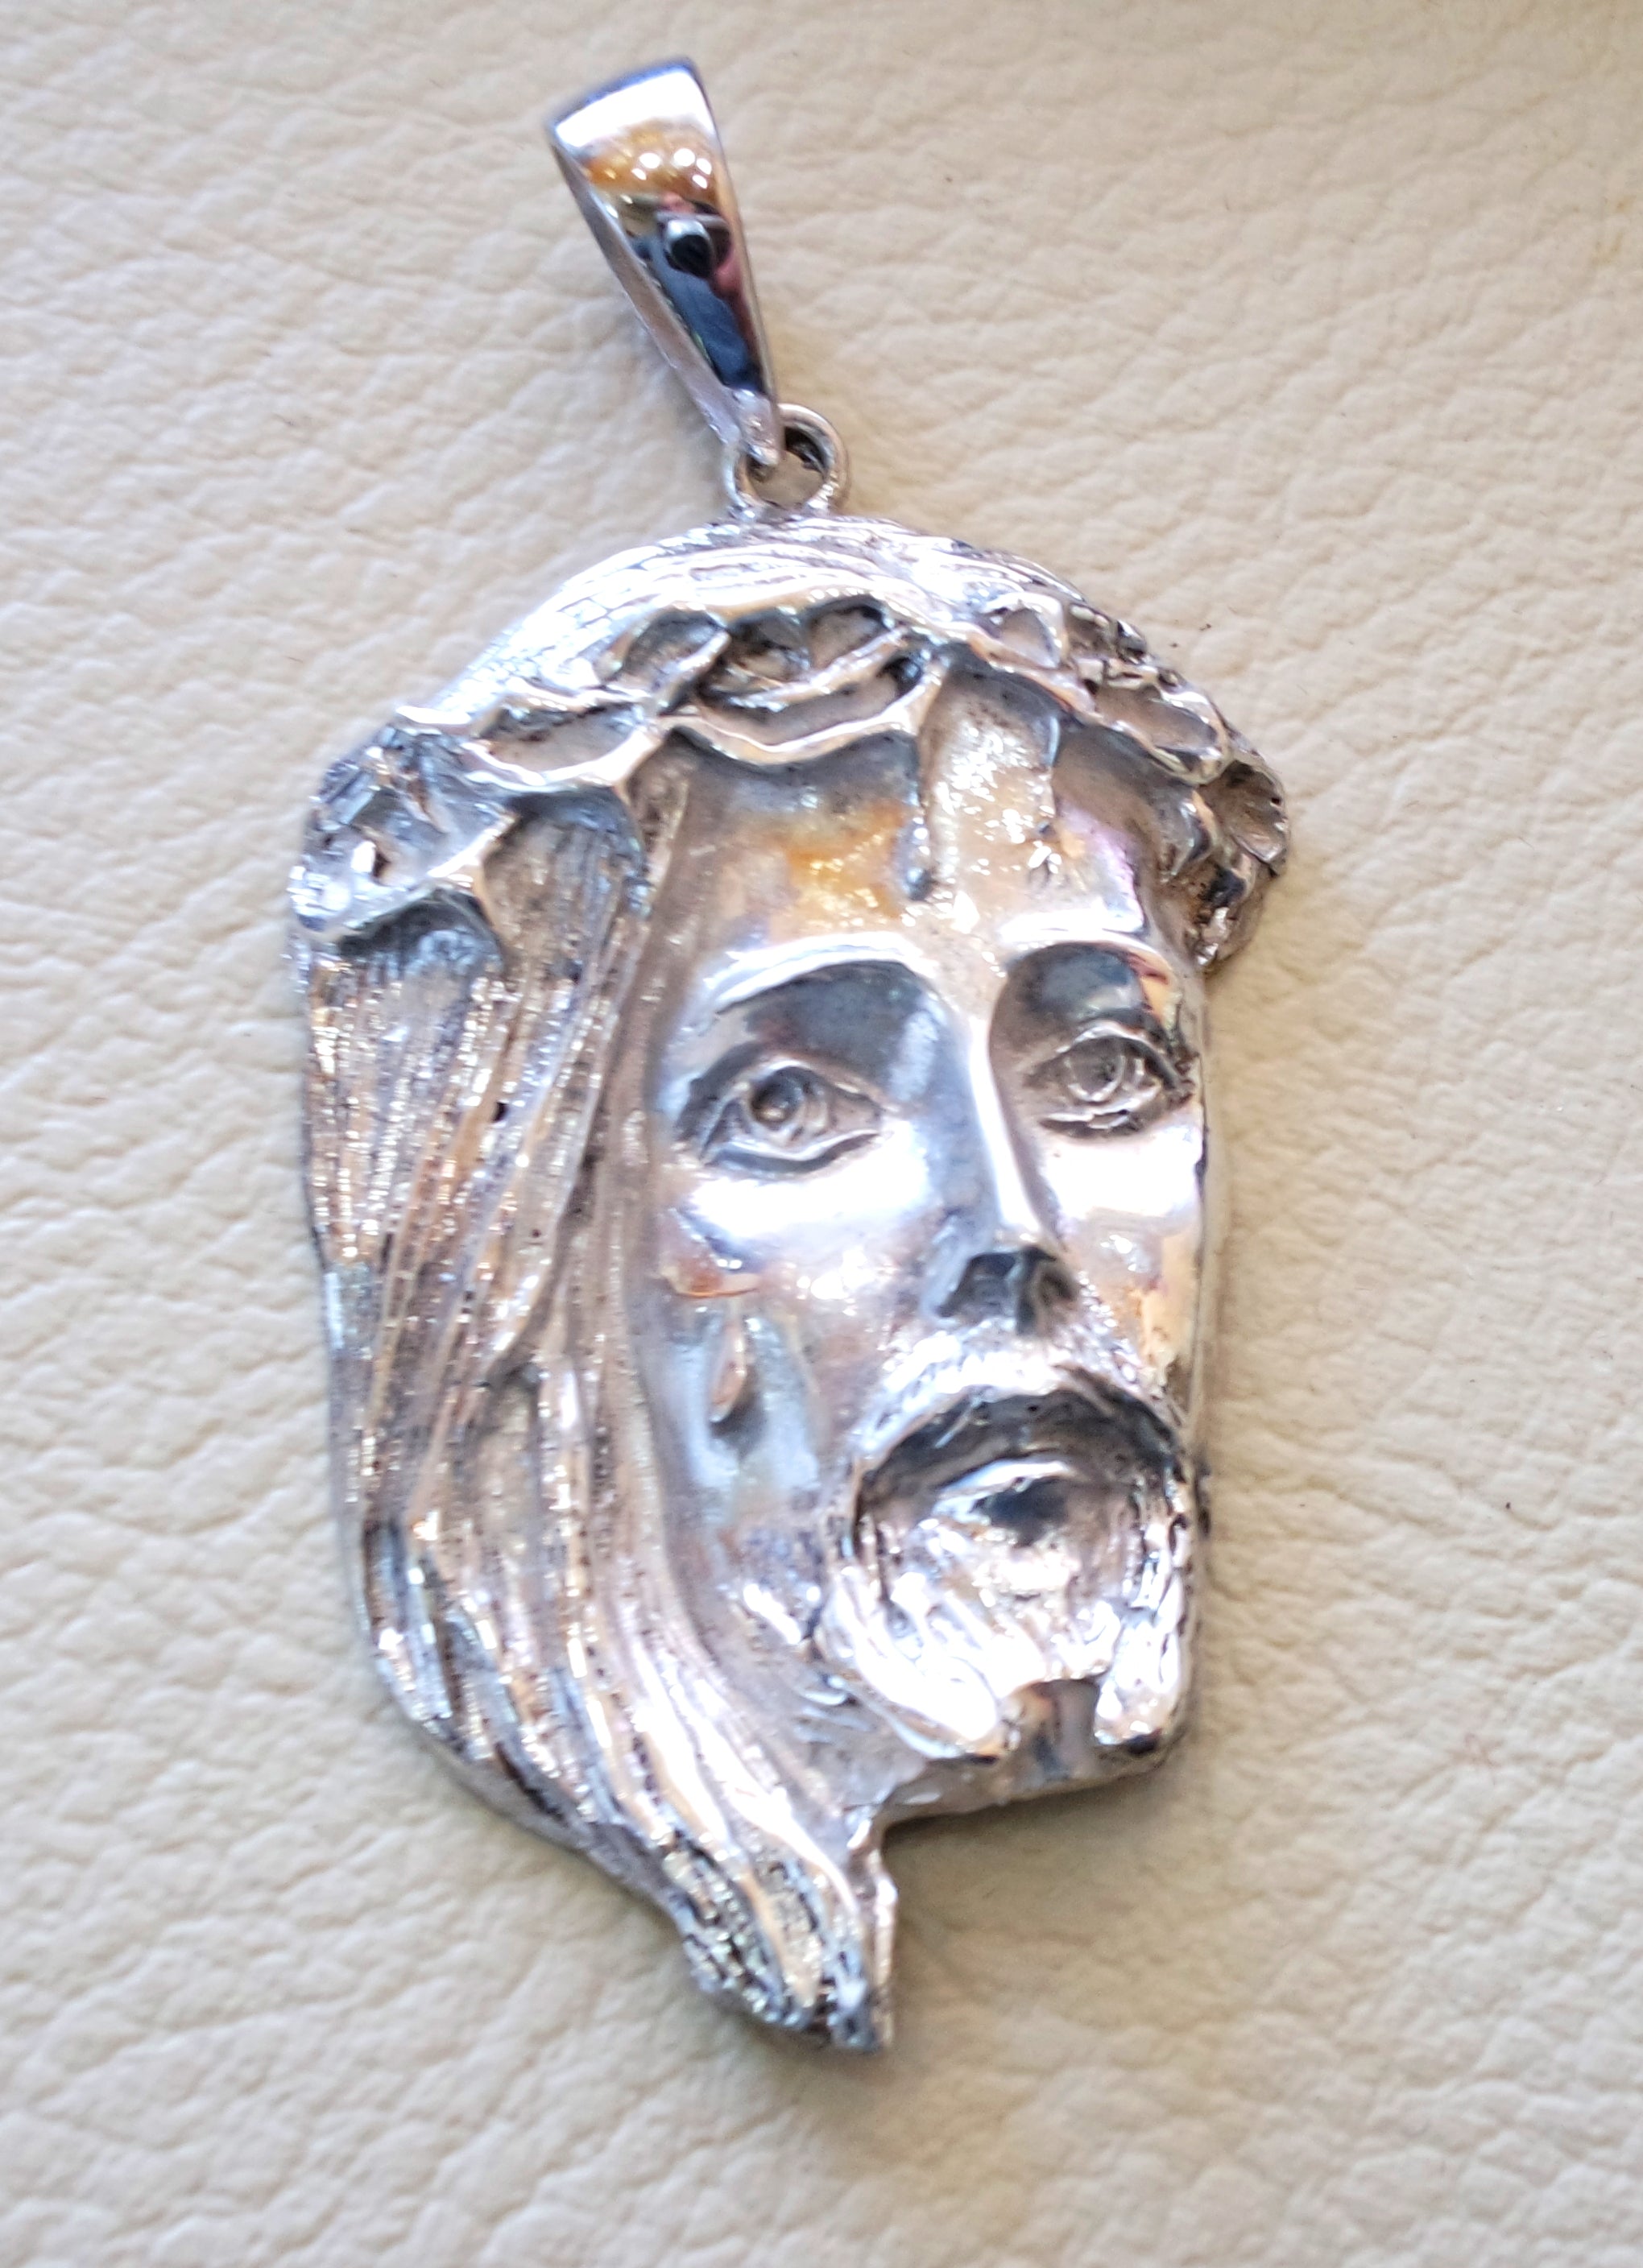 Jesus Christ face head huge pendant sterling silver 925 middle eastern jewelry christianity vintage handmade heavy express shipping